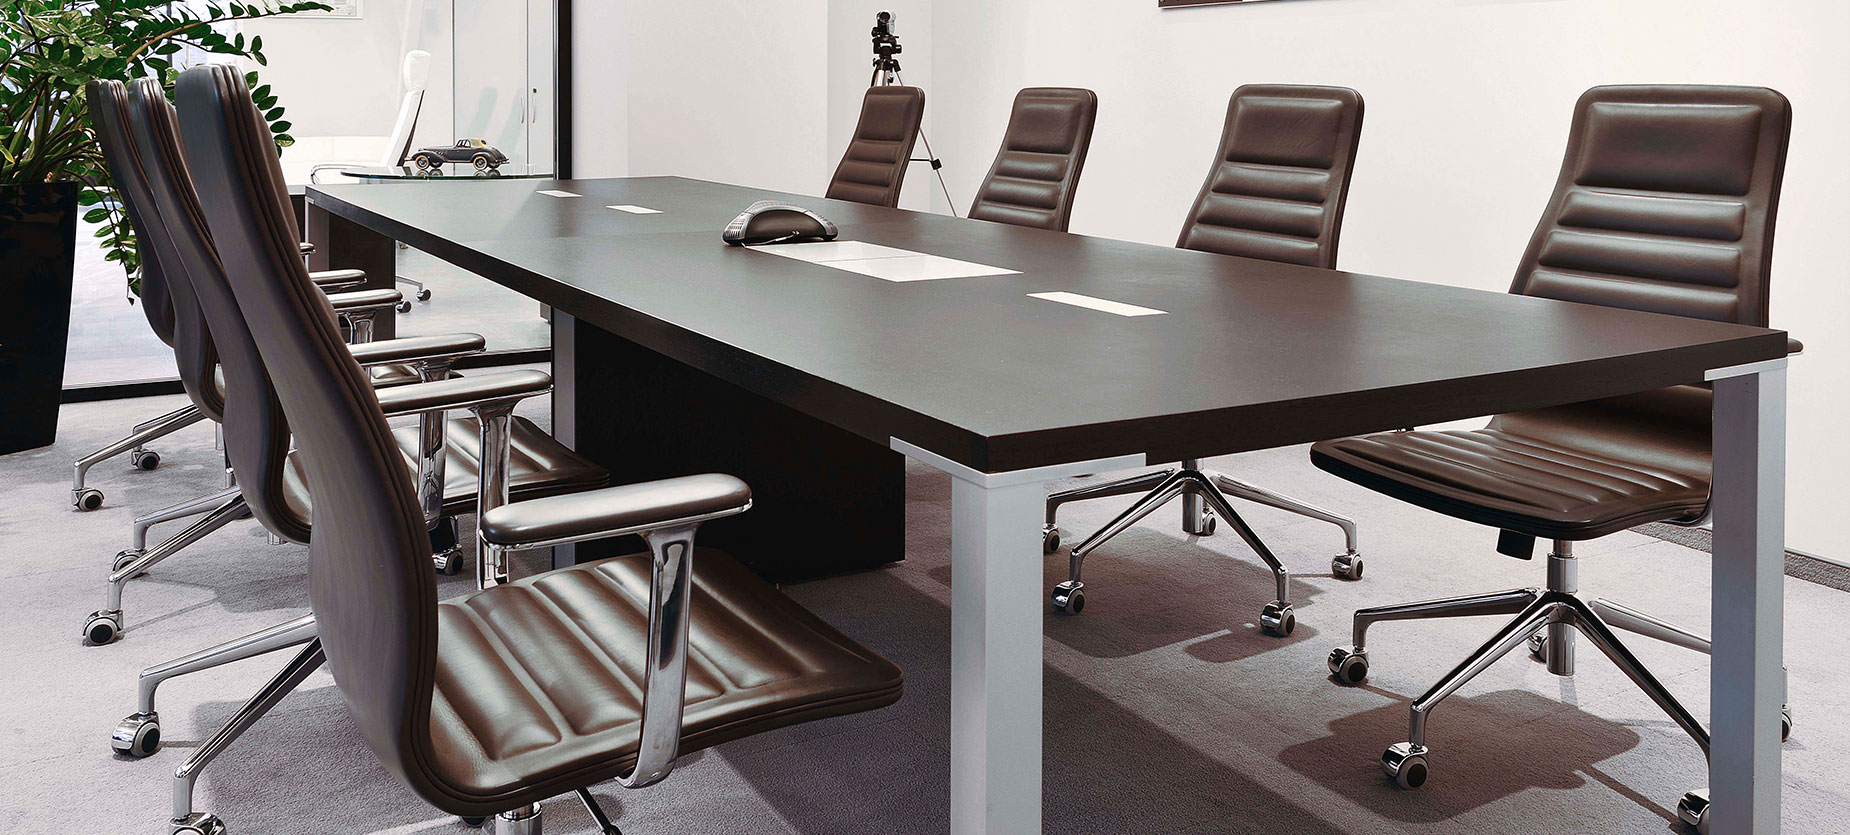 The Conference room is usually where clients spend the most time, so it needs to make a strong first impression. The a_con conference table and Lotus chairs do exactly that.